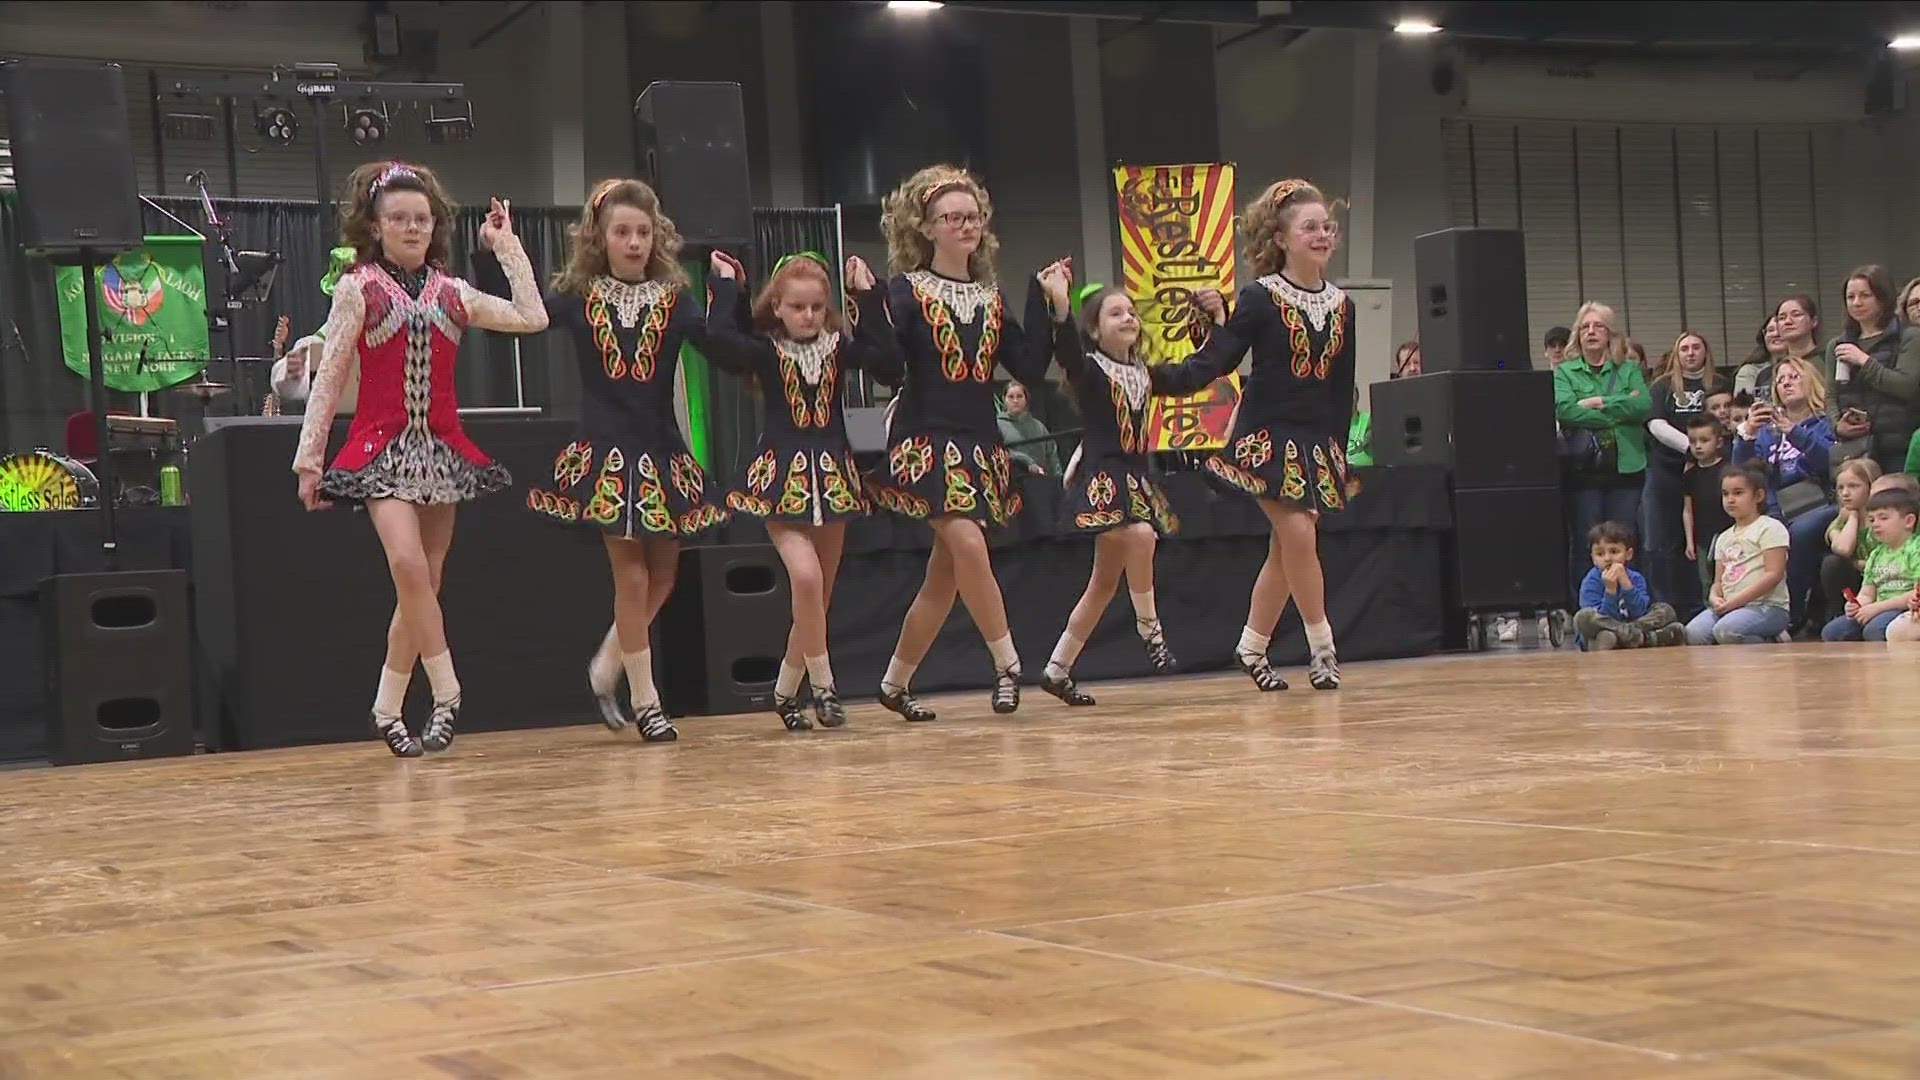 Irish dancers took to the dance floor at the Niagara Falls Convention Center as the city started a weekend celebrations.